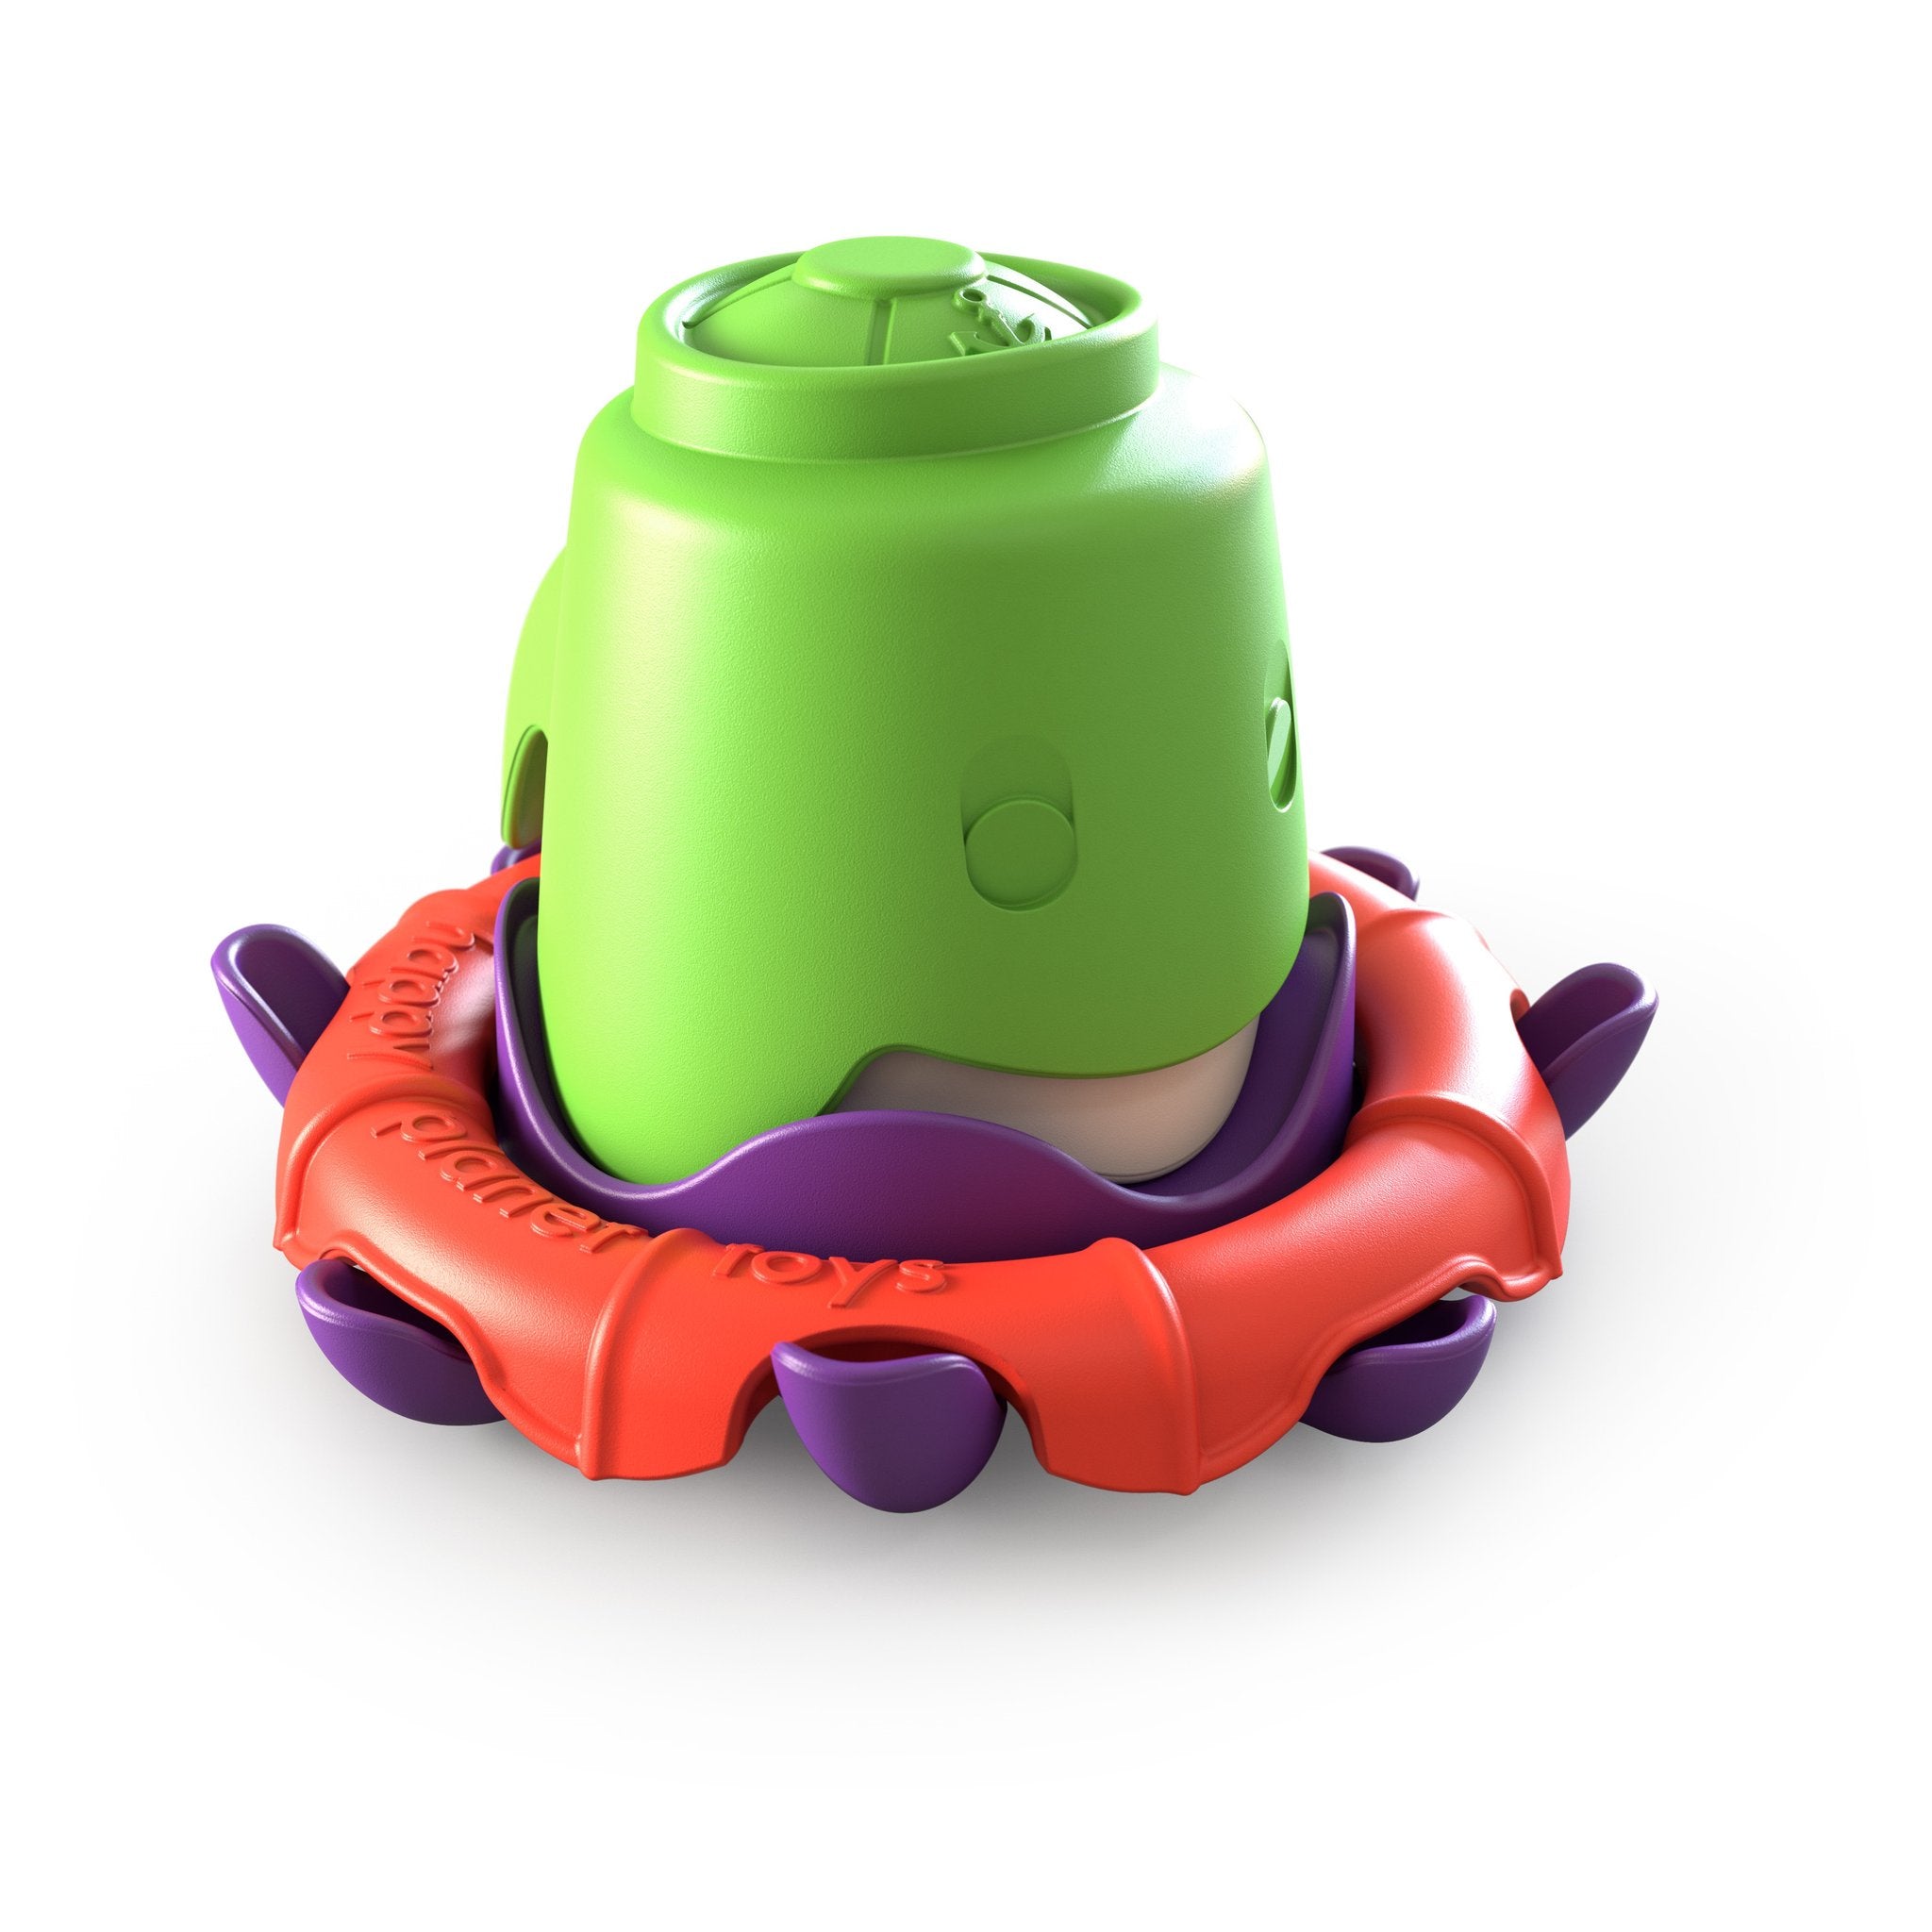 Happy Planet Toys - Octo-buoy stacking cup set